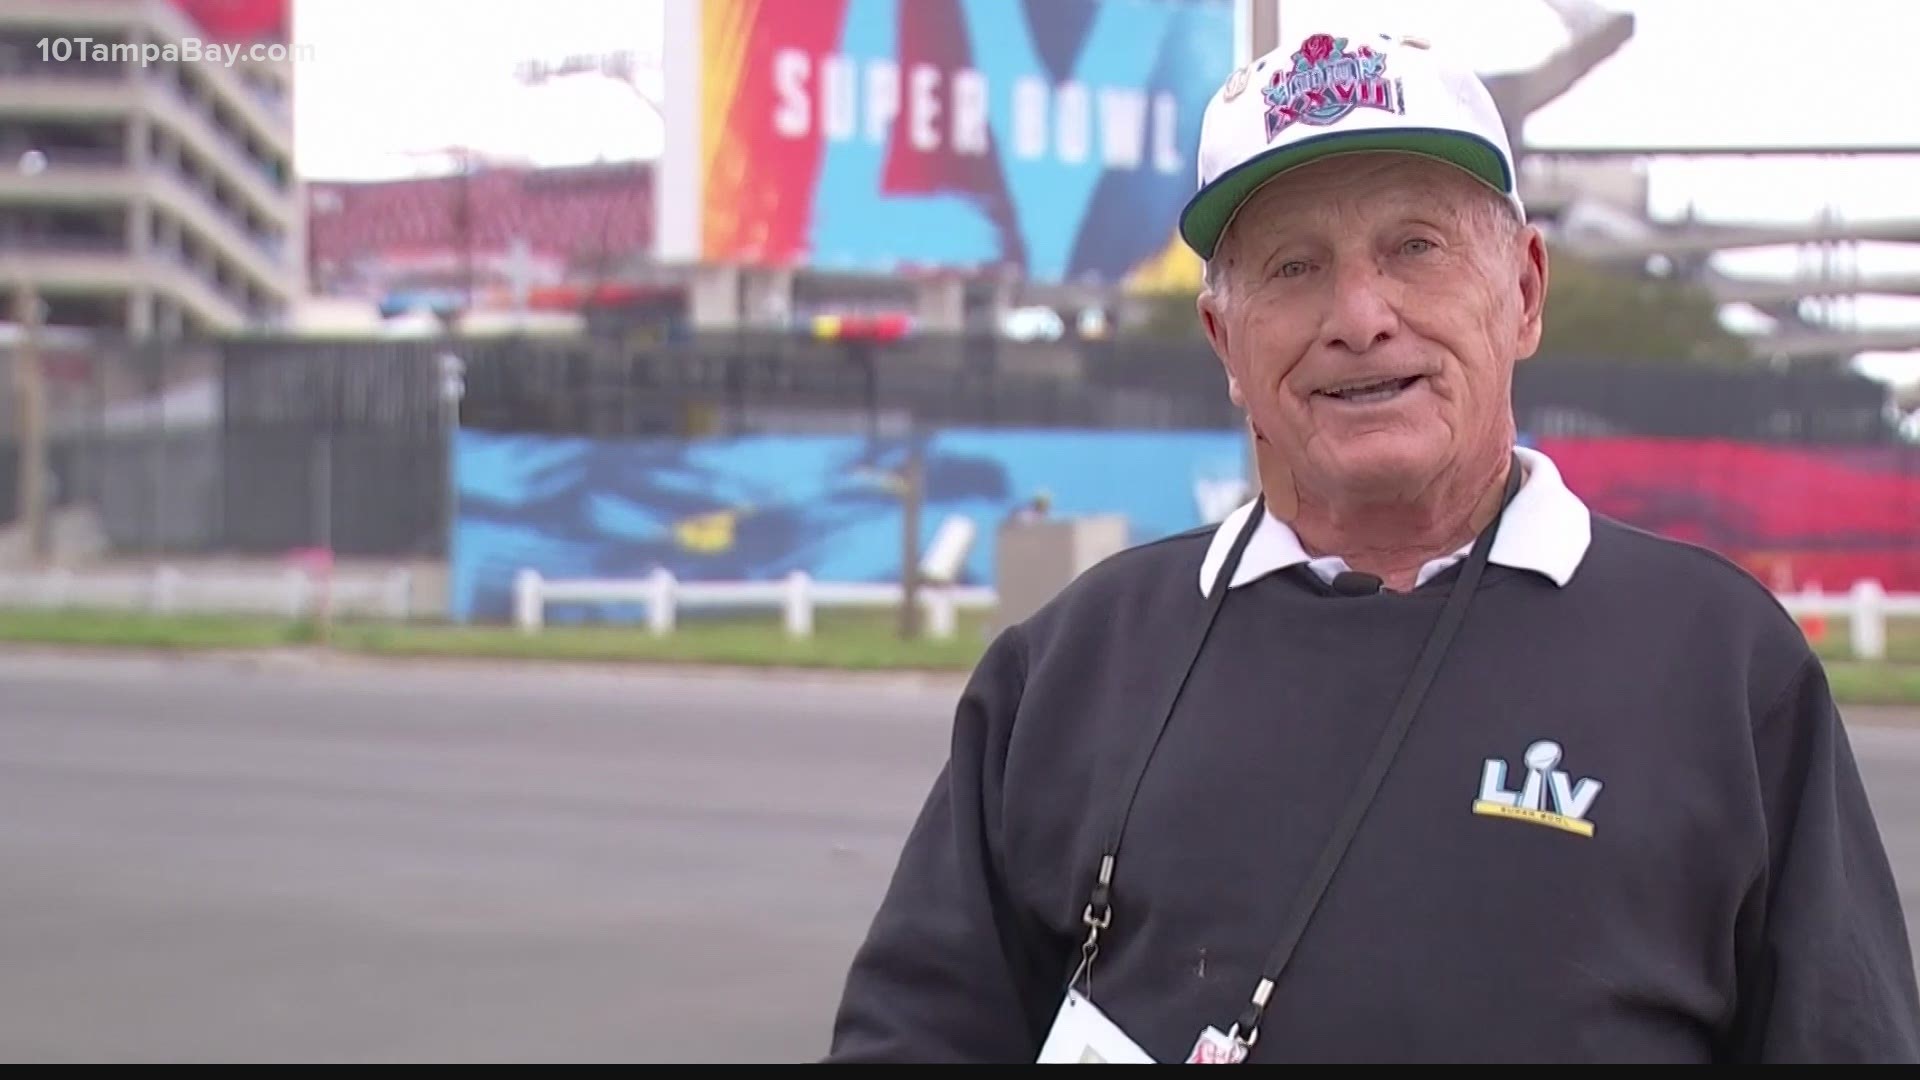 At 91-years-old, George Toma has never missed a Super Bowl. He's been in Tampa since Jan. 10 preparing Raymond James Stadium.